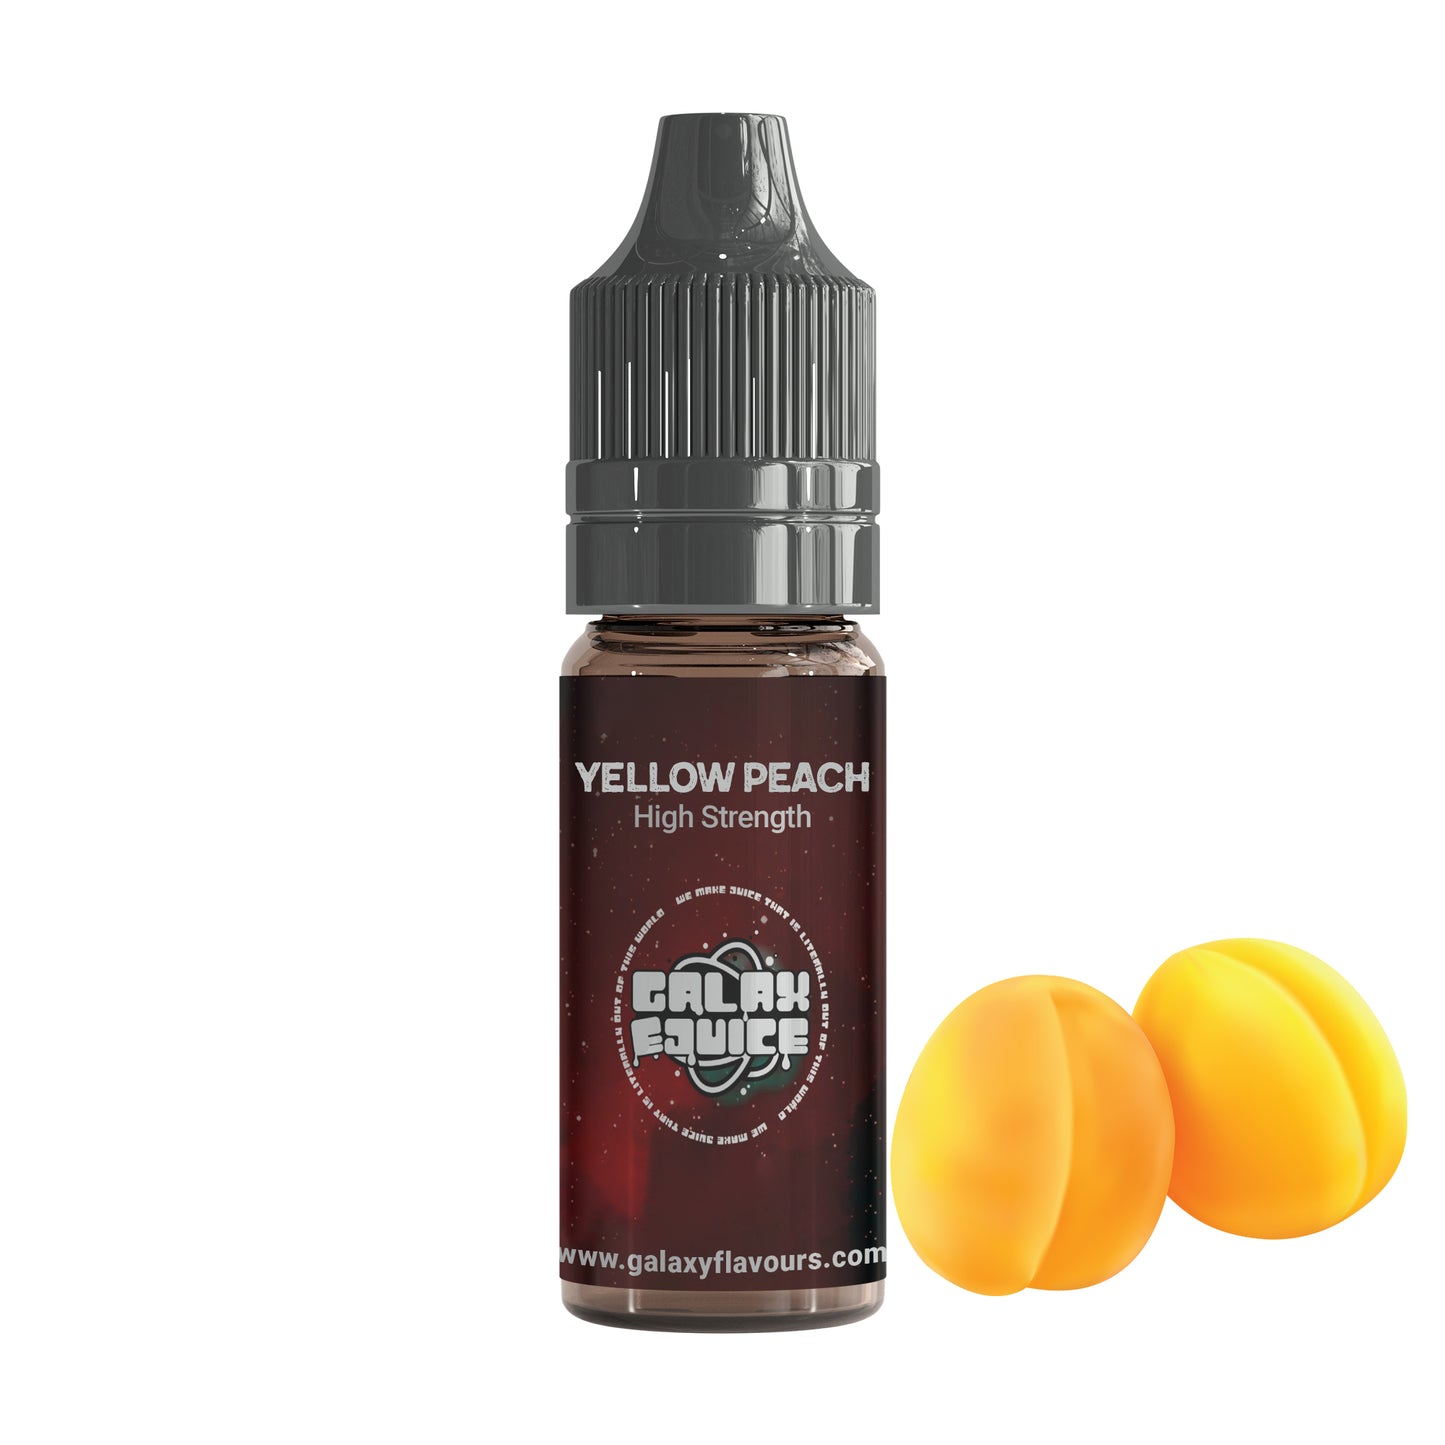 Yellow Peach High Strength Professional Flavouring.